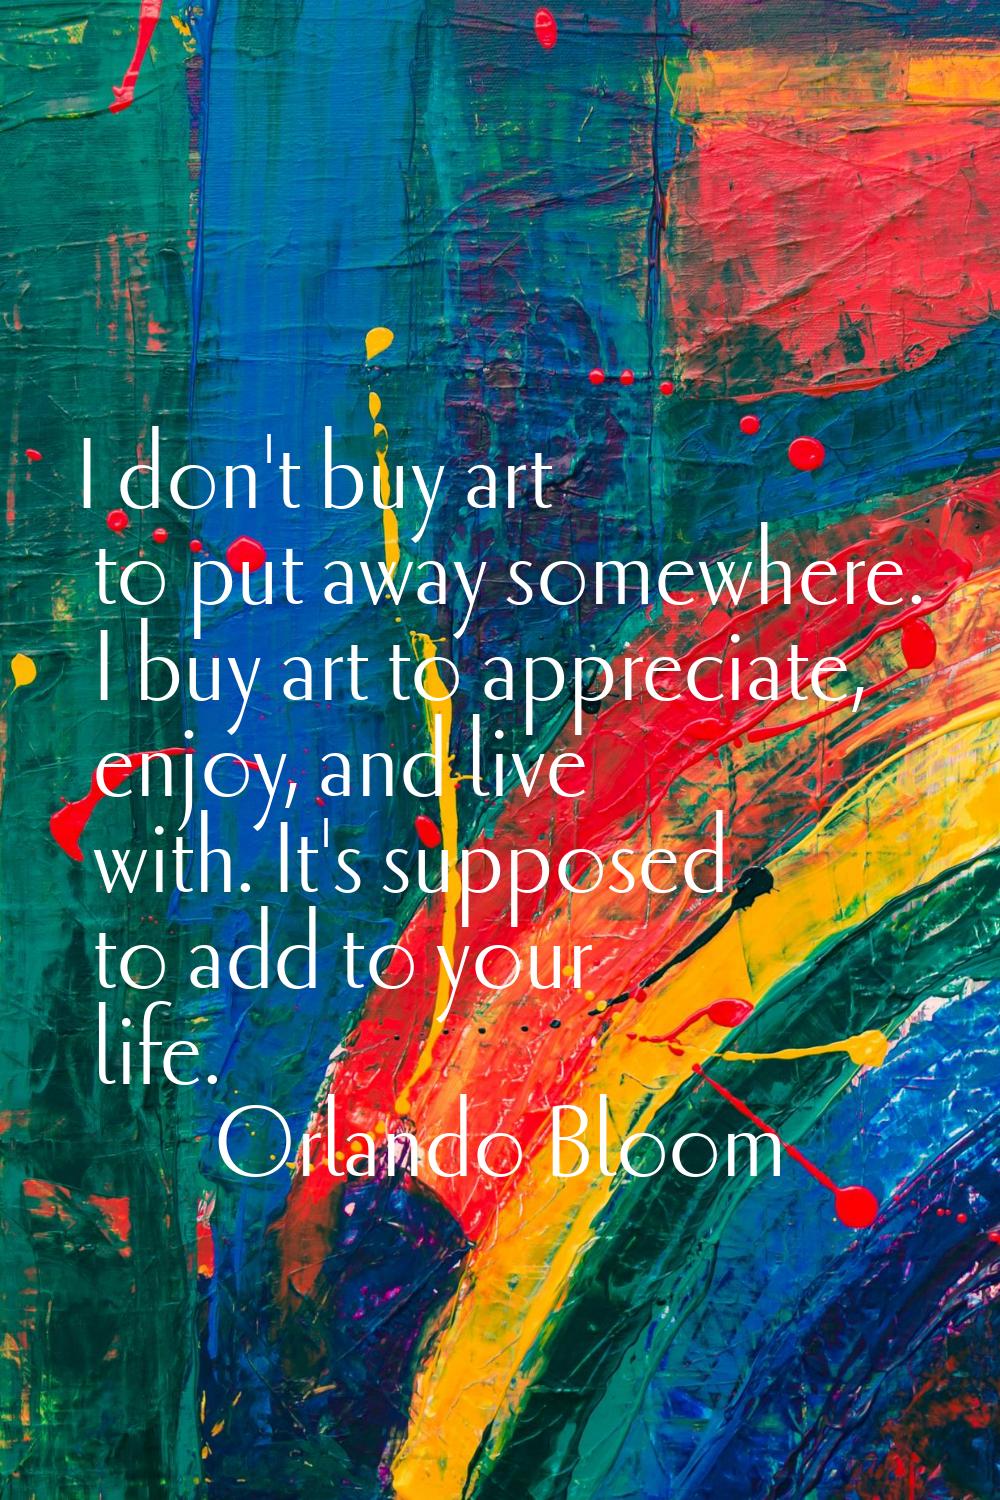 I don't buy art to put away somewhere. I buy art to appreciate, enjoy, and live with. It's supposed